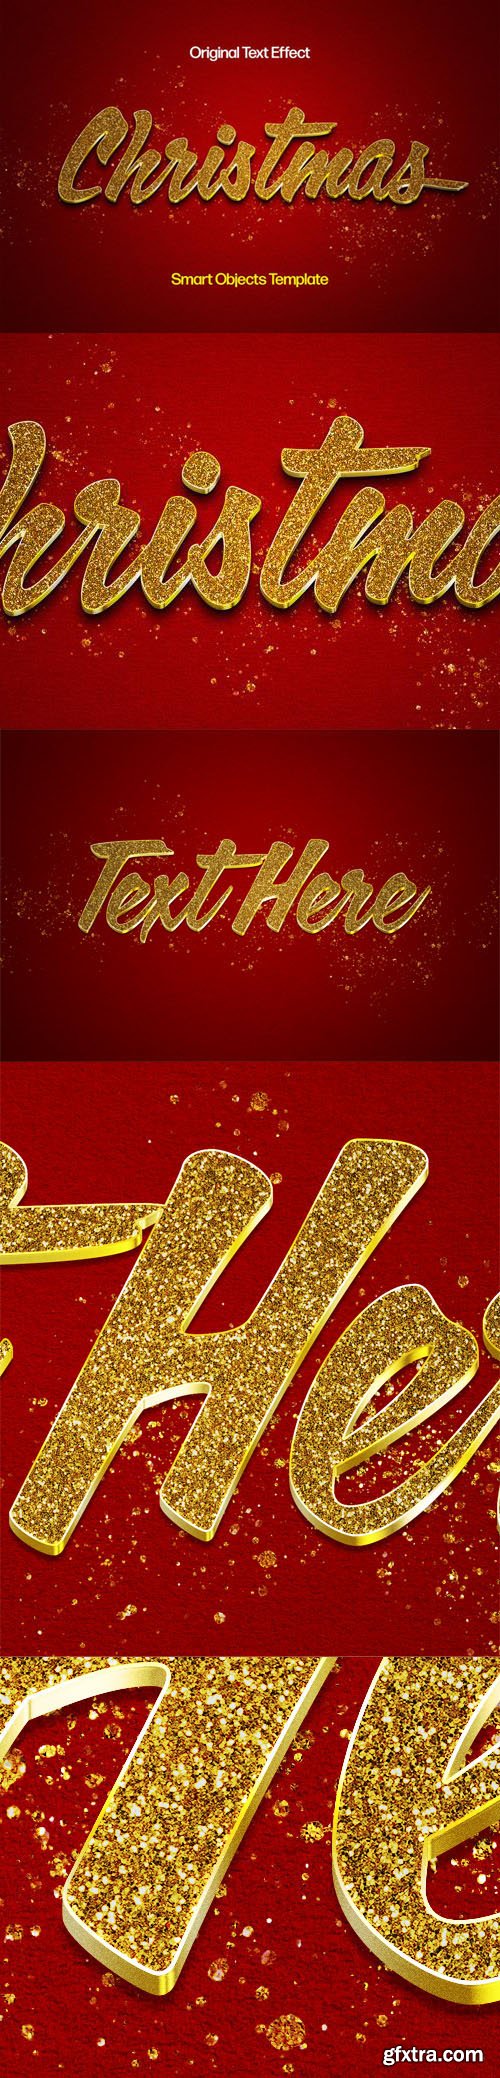 Christmas Gold Glitter Photoshop Text Effect